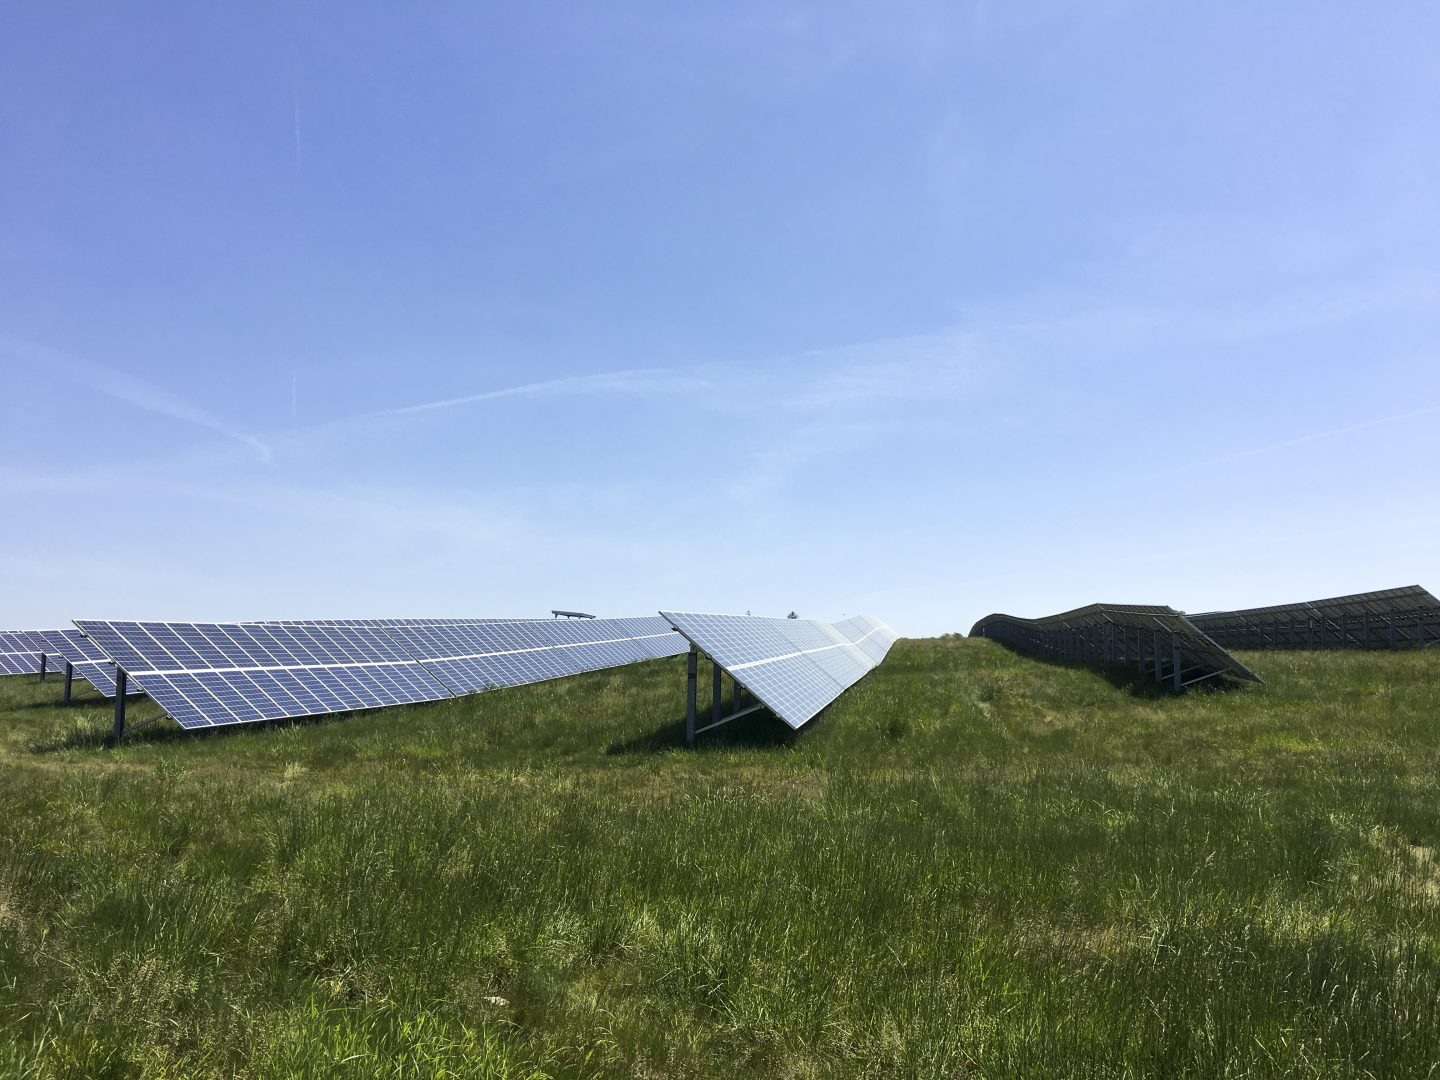 Solar panels in Hanover generate electricity for the Snyder's-Lance snack company.